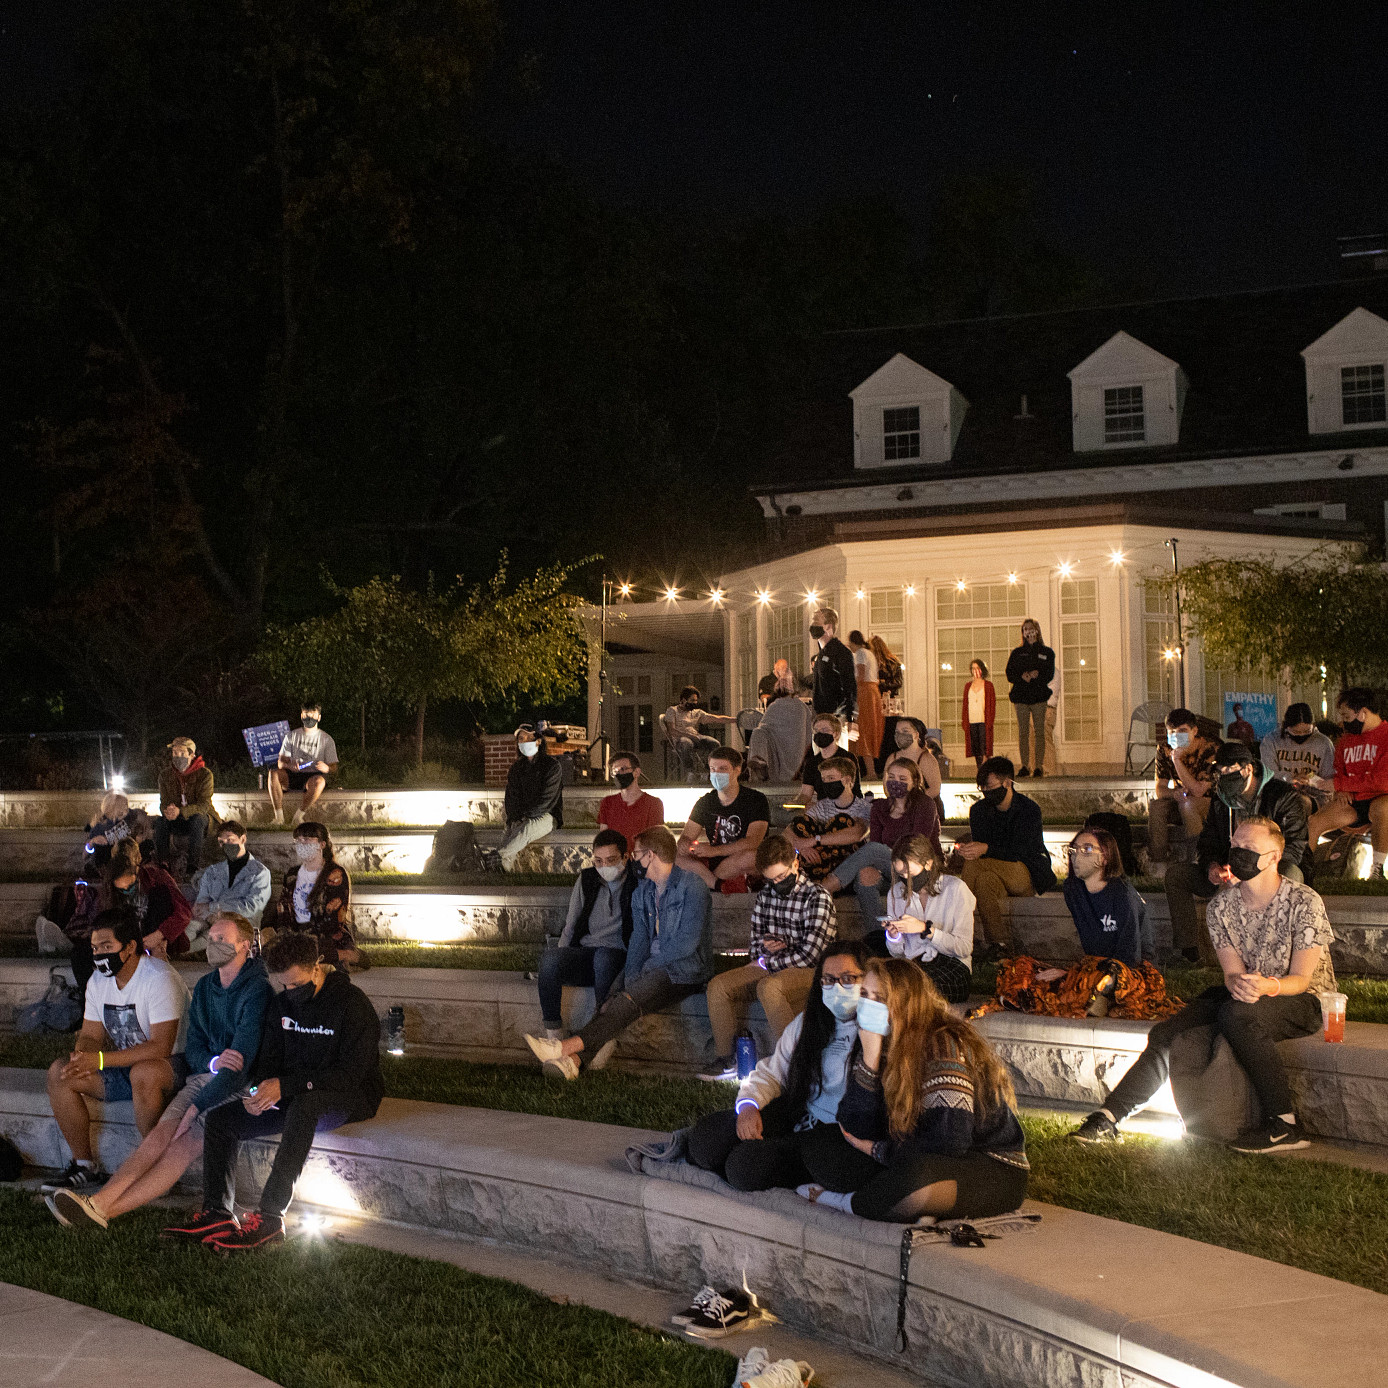 Group of students watches debate in outdoor amphitheater